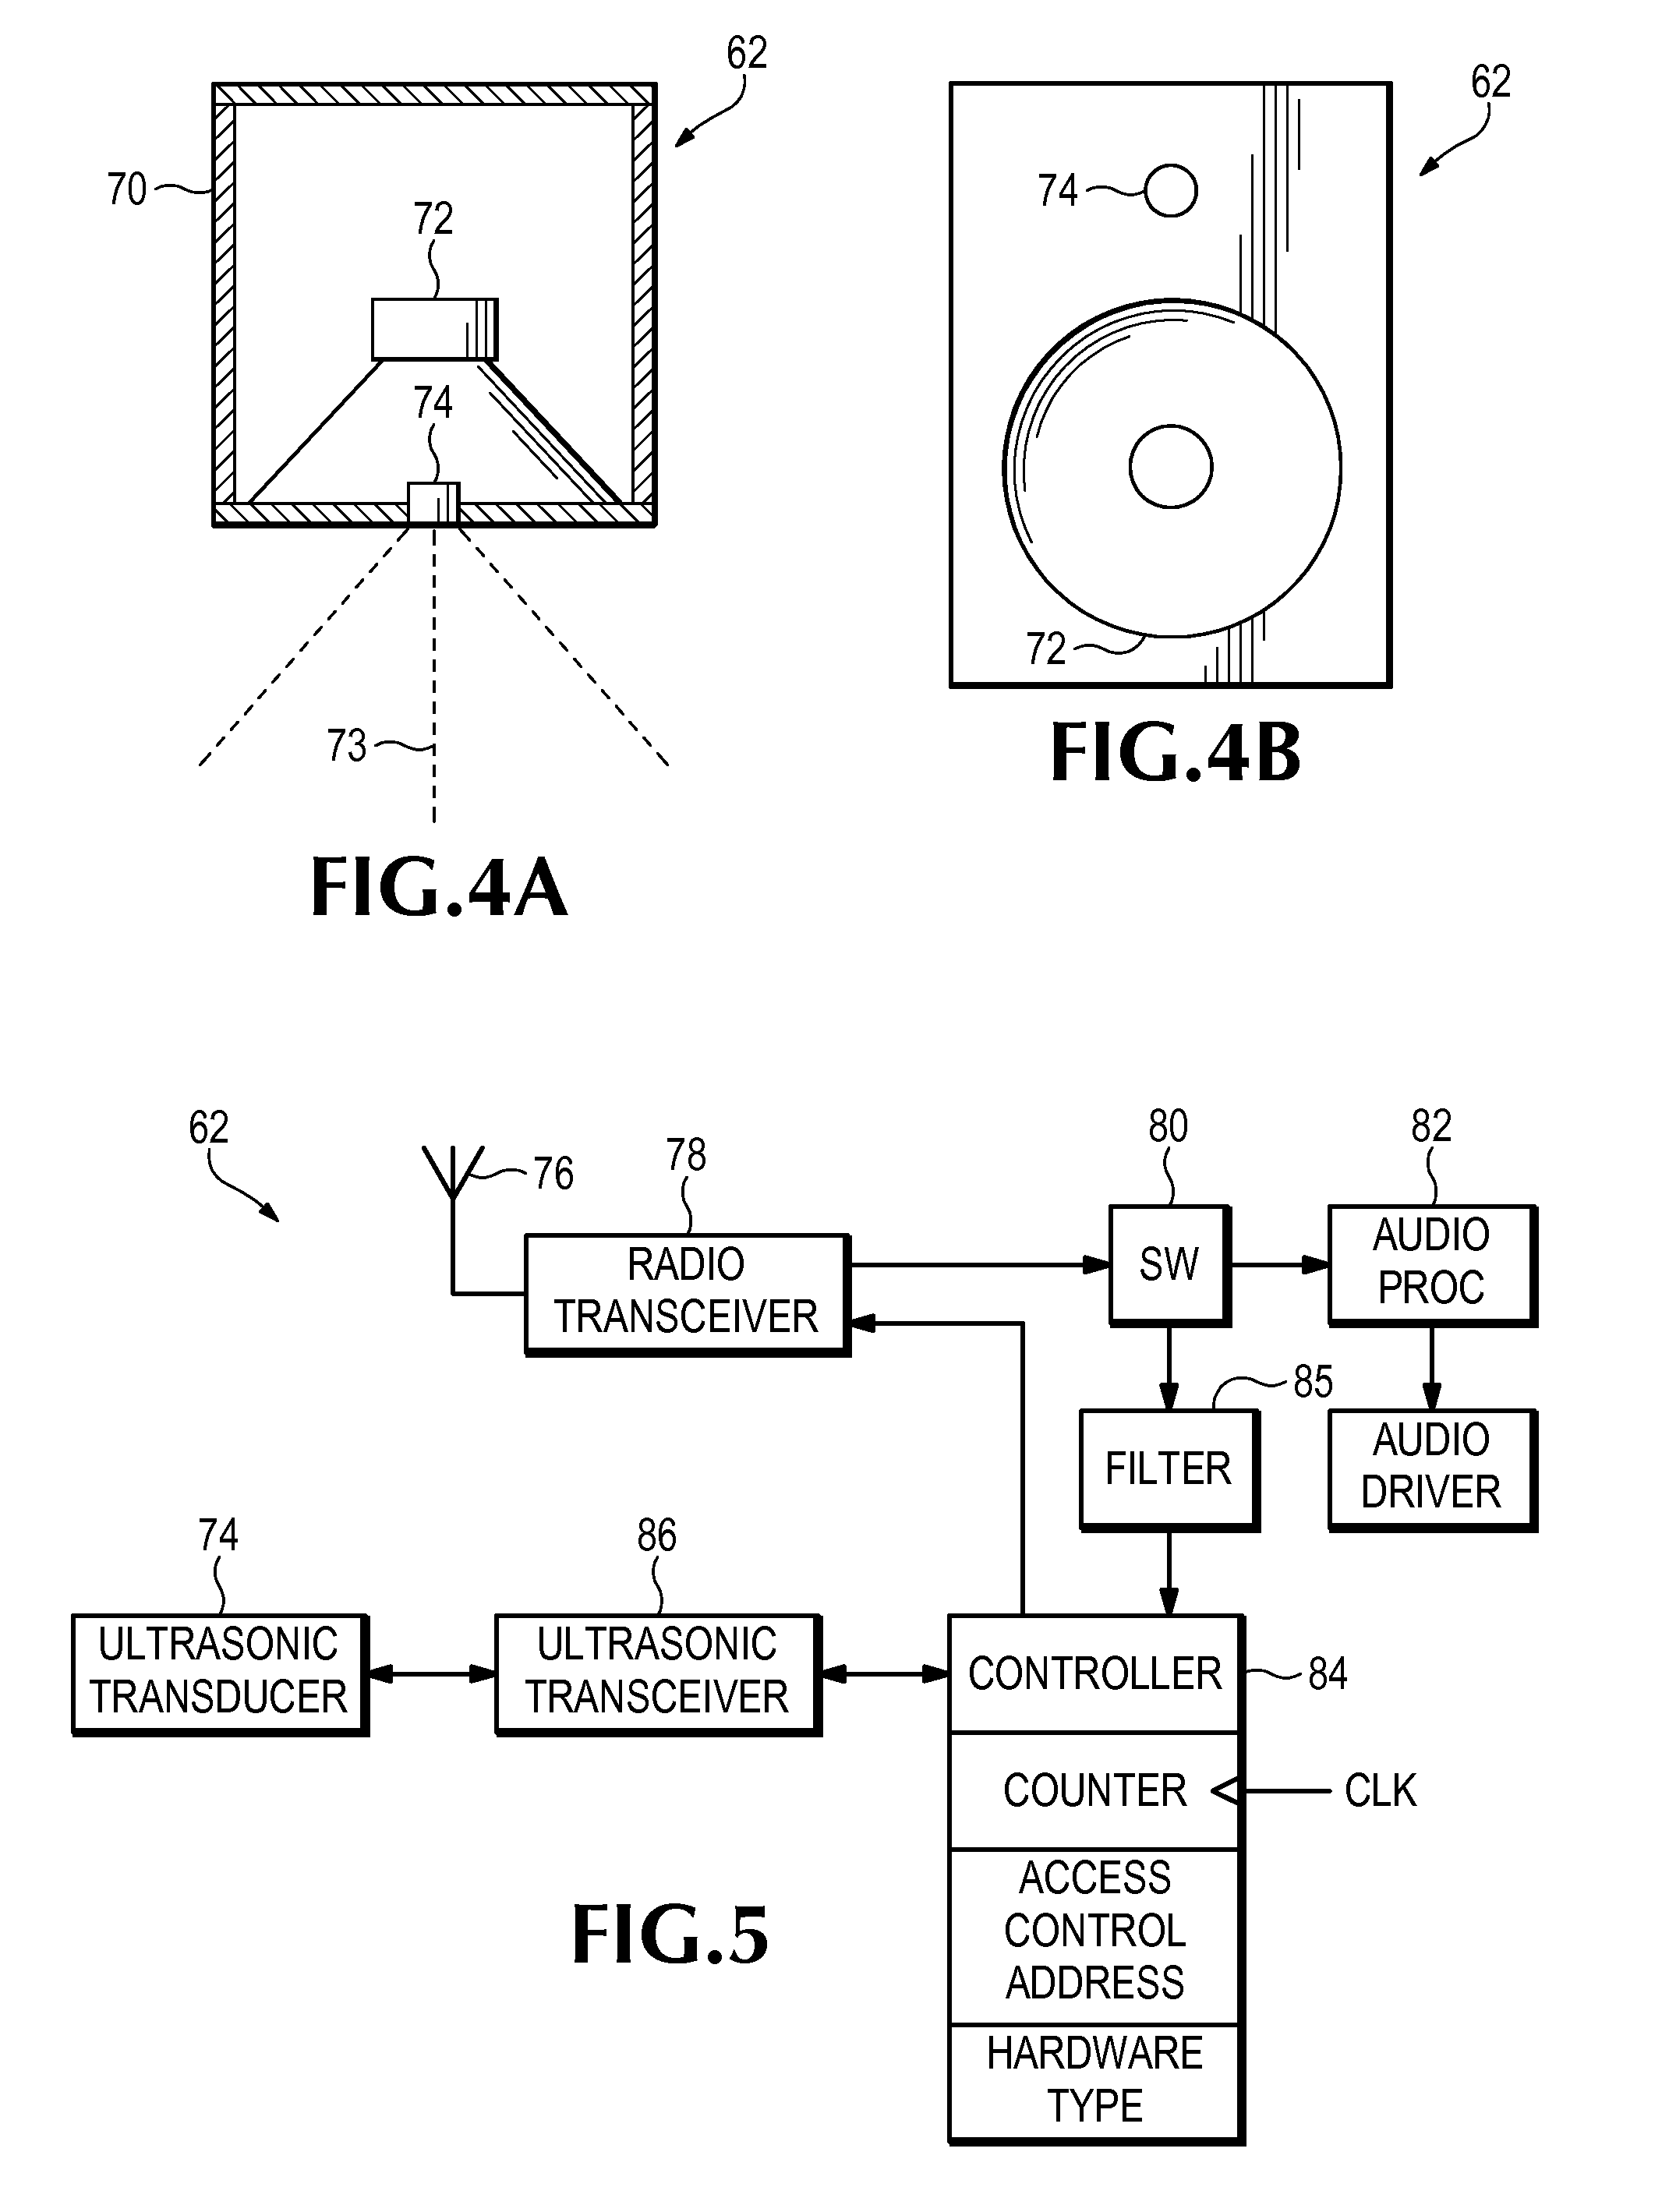 Method of identifying speakers in a home theater system